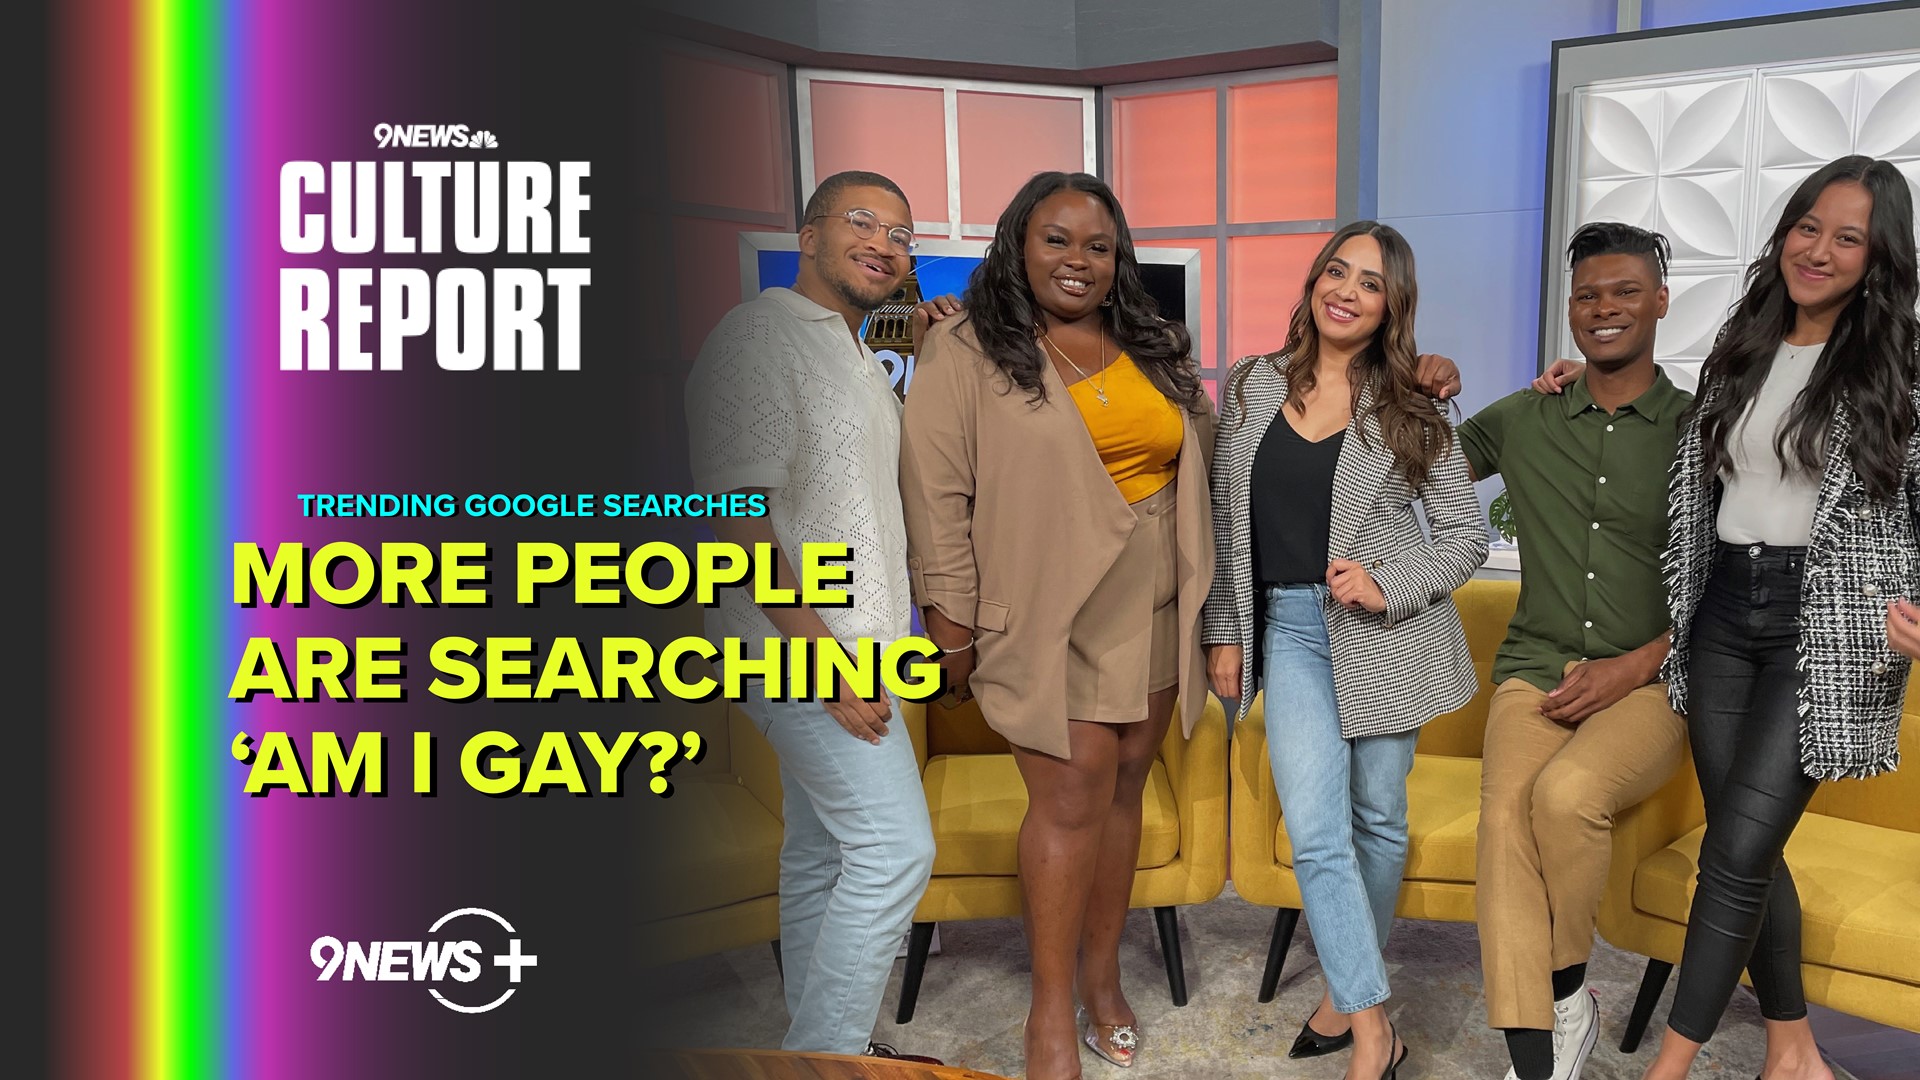 This week we talk about a staggering rise in people searching 'Am I Gay' on Google and protests that erupted over the anti-LGBTQ stance of a coffee shop in Colorado.